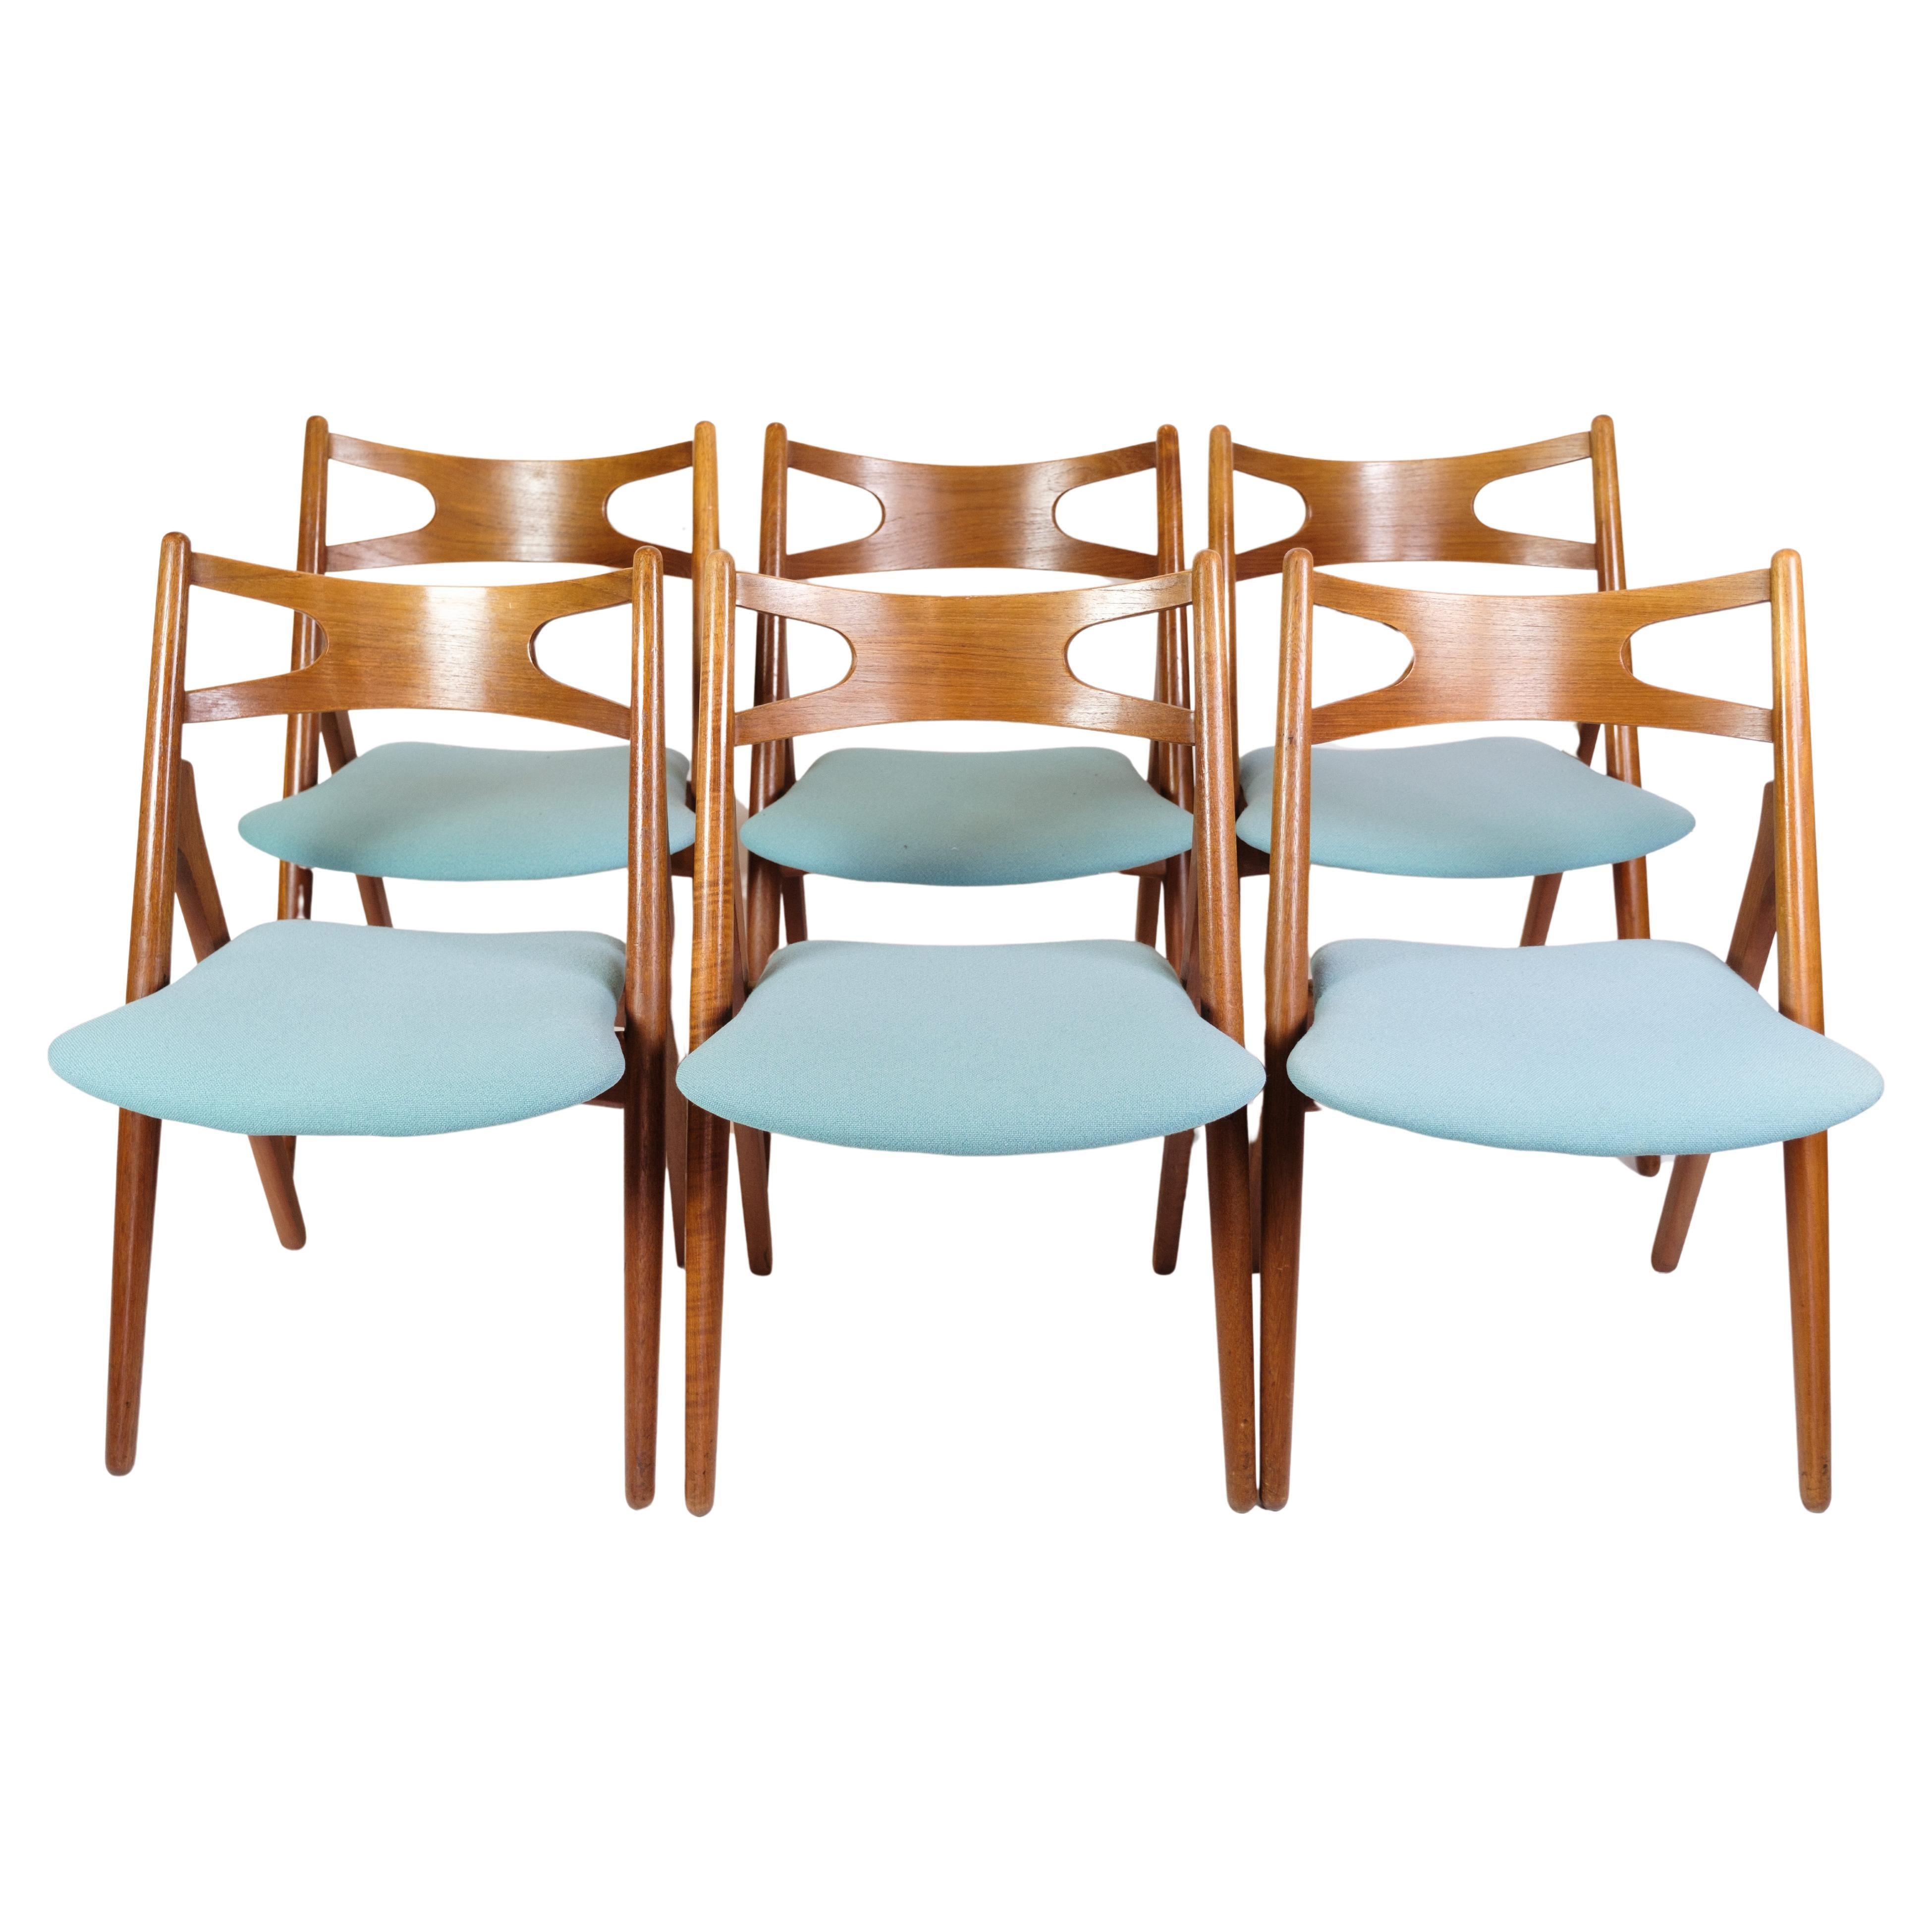 Set Of 6 Dining Chairs Model CH29P Made In Teak By Hans J. Wegner From 1950s For Sale